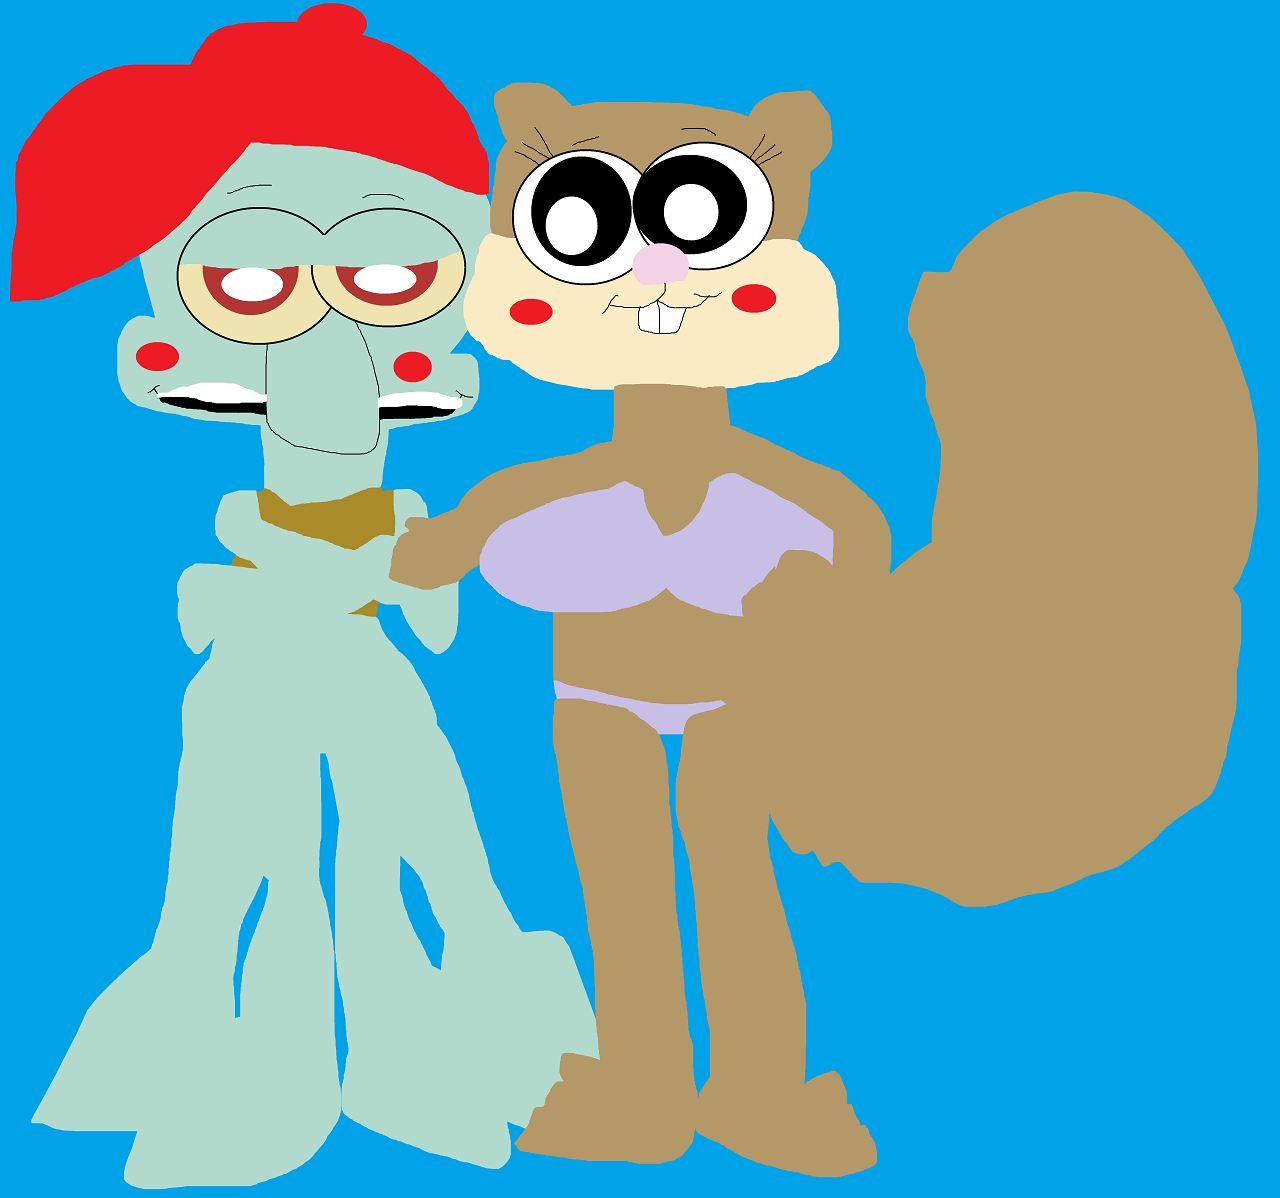 Squidward In Cap Less Annoyed Sandy Added by Falconlobo